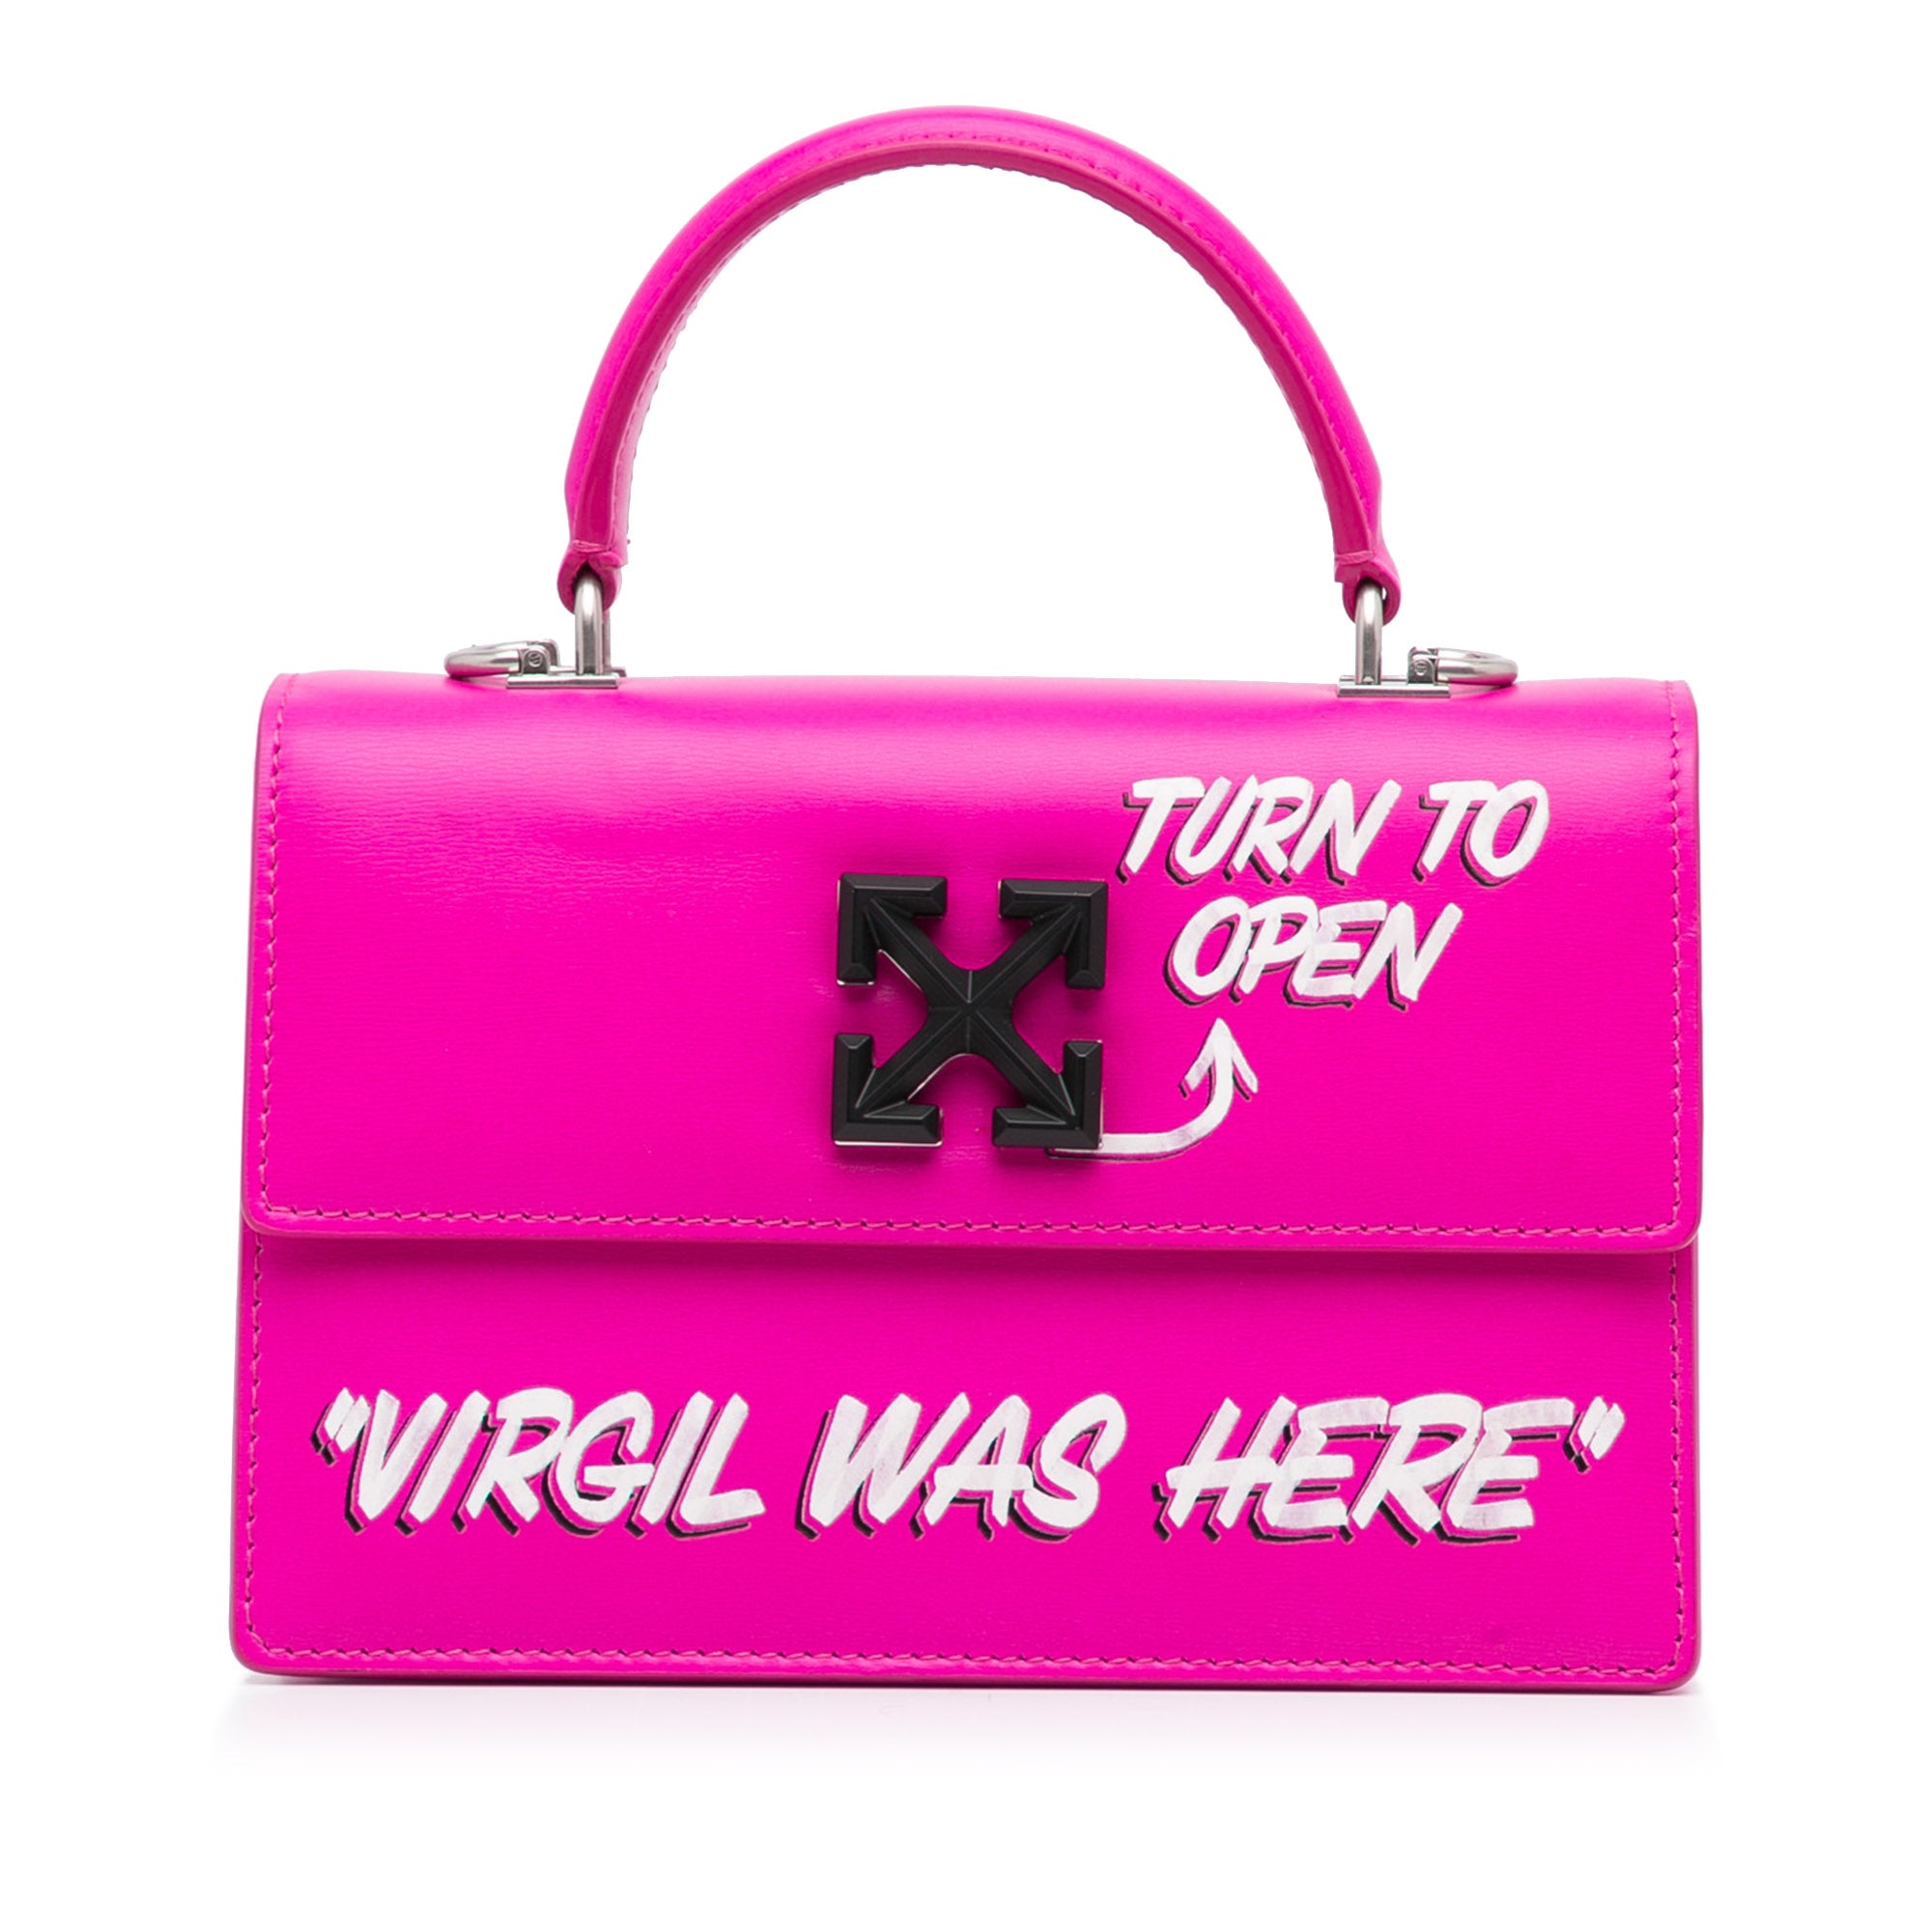 virgil was here purse